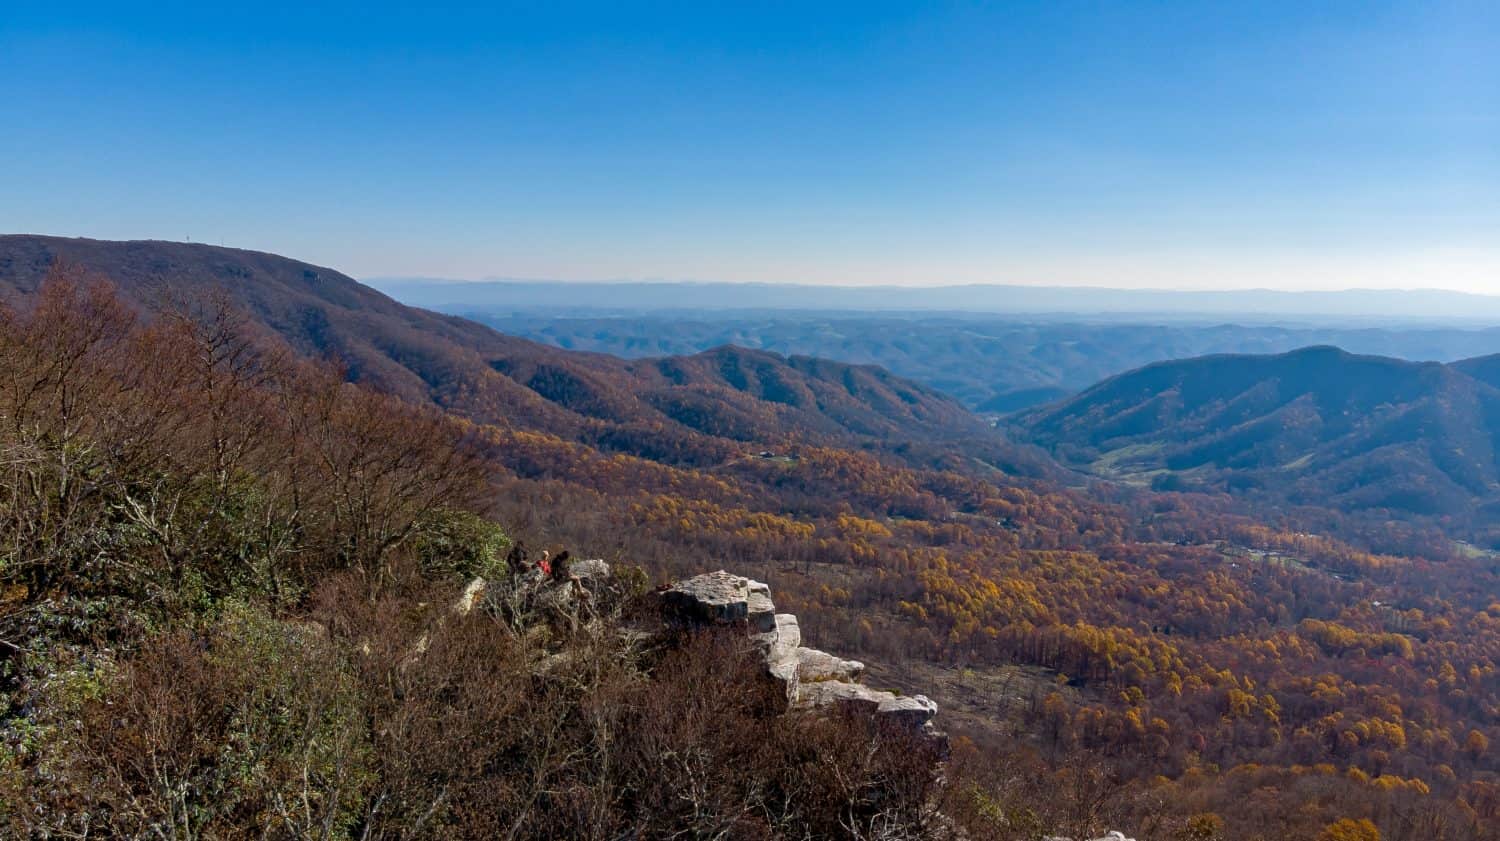 The Butte tip on Clinch mountain